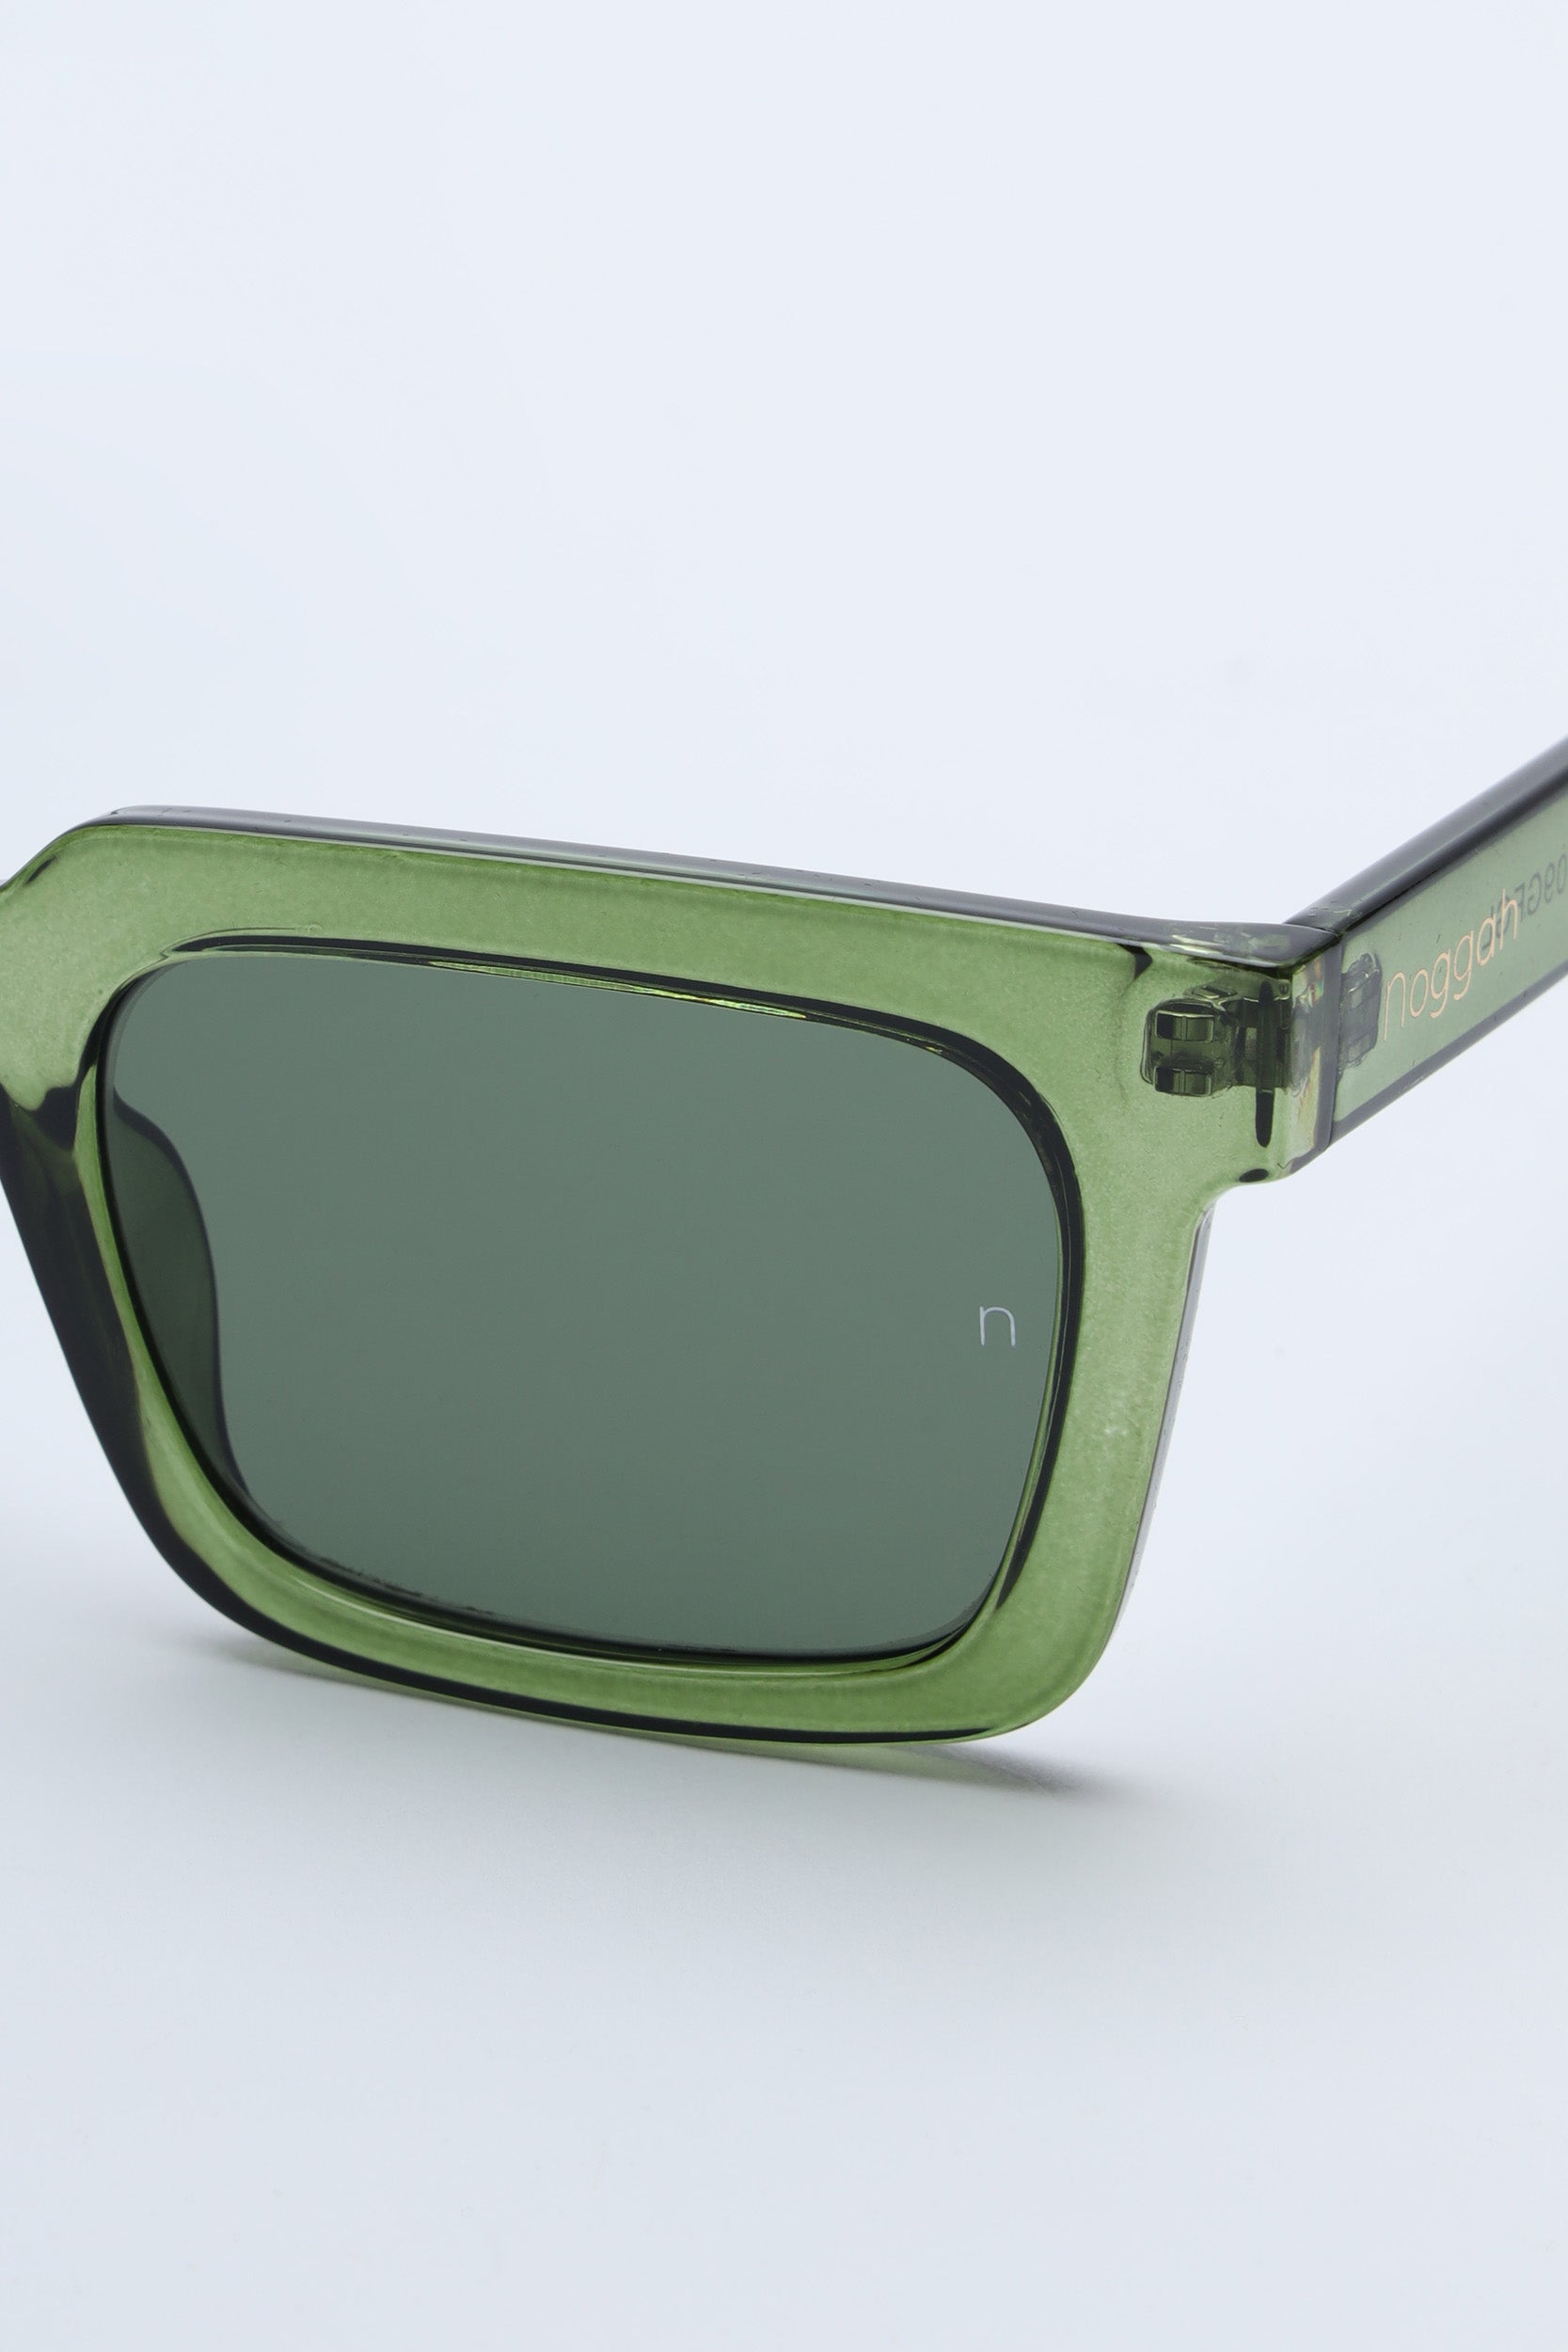 NS1001YFGL PC Brown Frame with Green Glass Lens Sunglasses